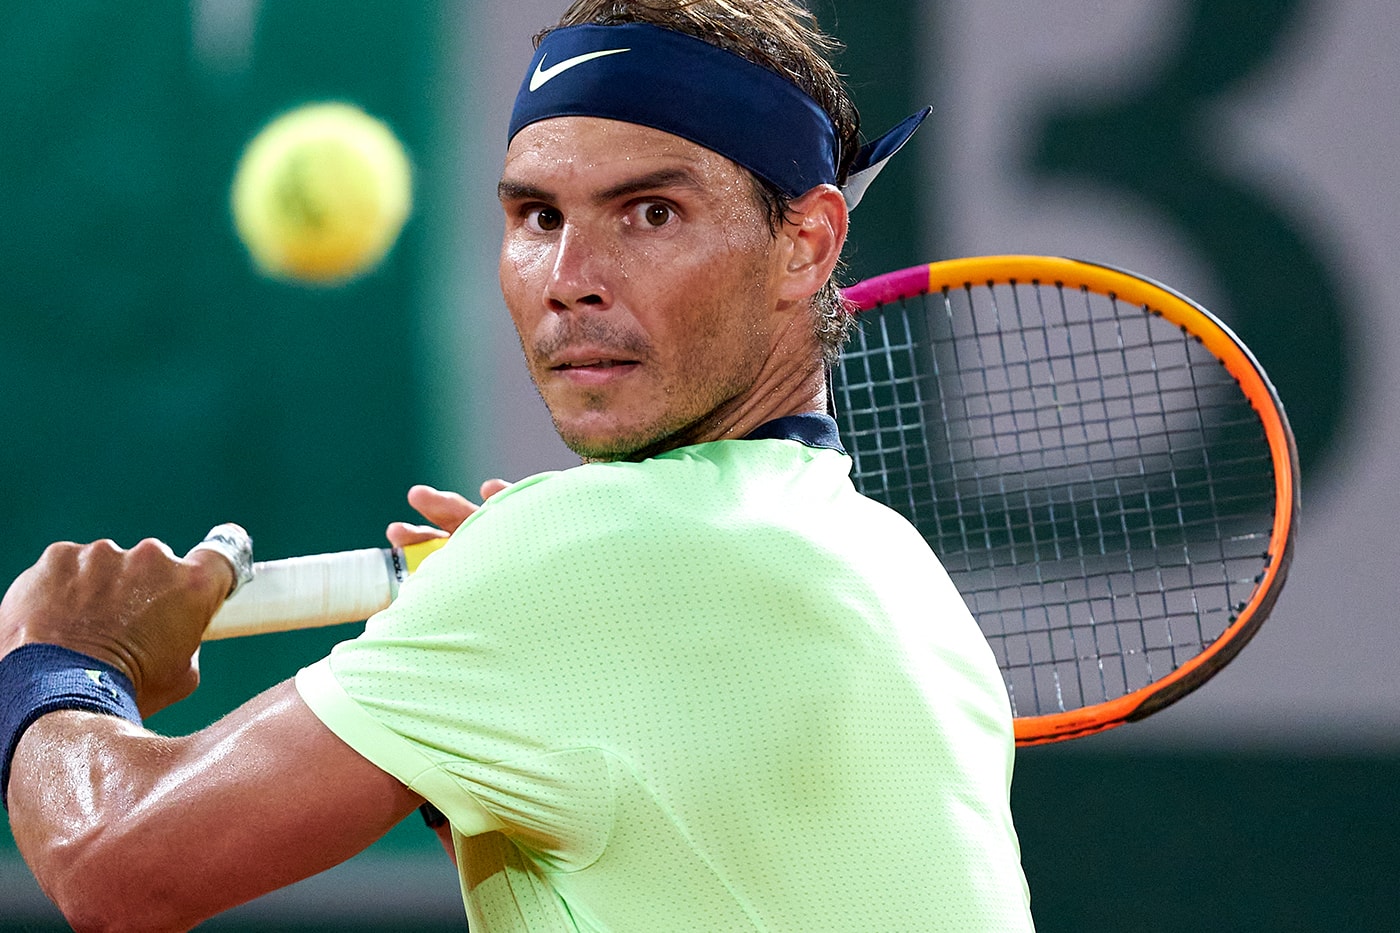 Rafael Nadal to Sit Out Wimbledon and 2021 Tokyo Olympics